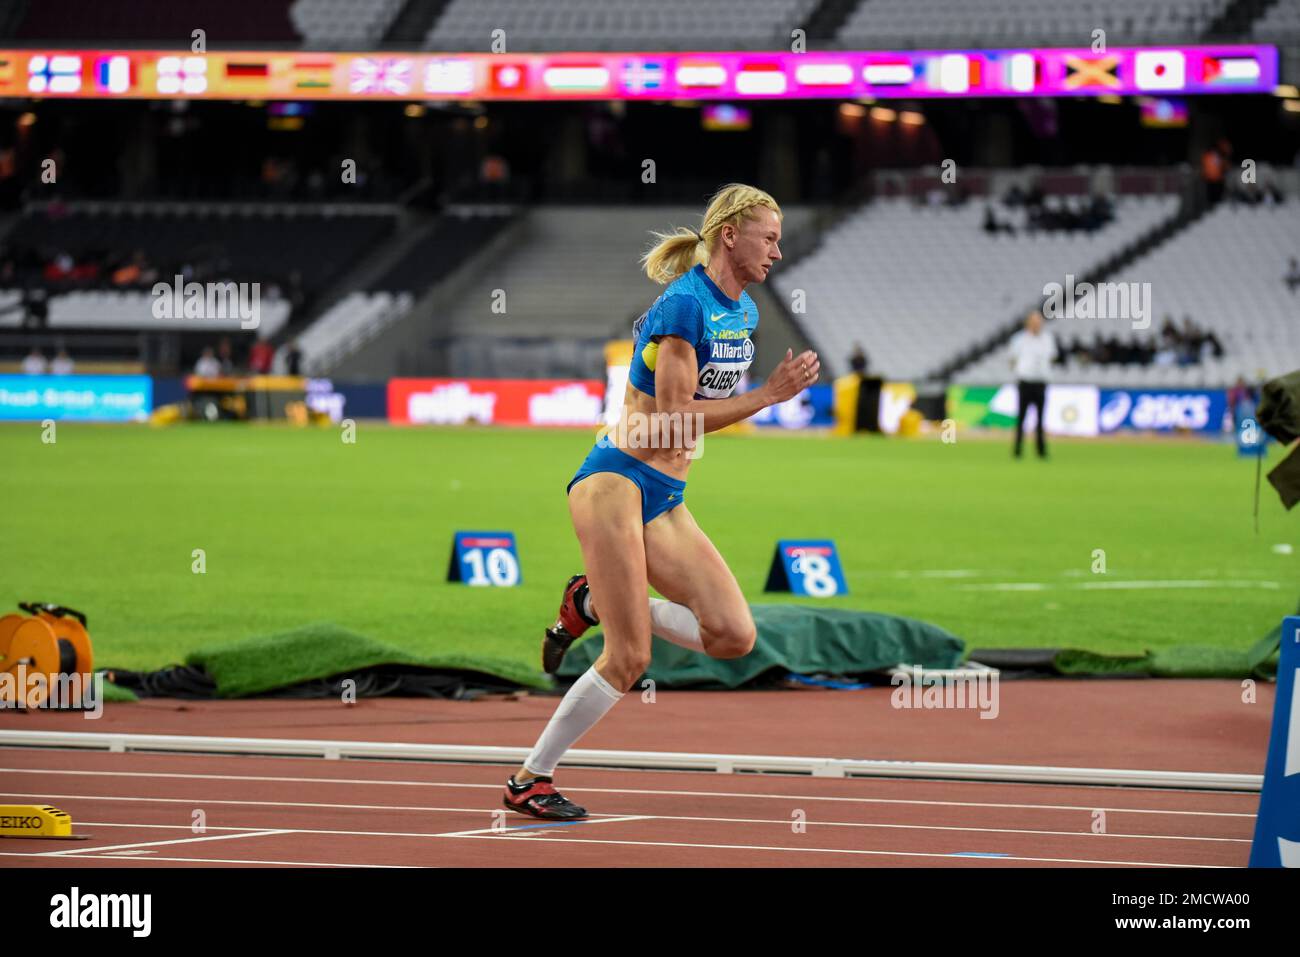 Olena Gliebova competing in the 2017 World Para Athletics Championships in the Olympic Stadium, London. T13 400m. Visually impaired Ukrainian athlete Stock Photo